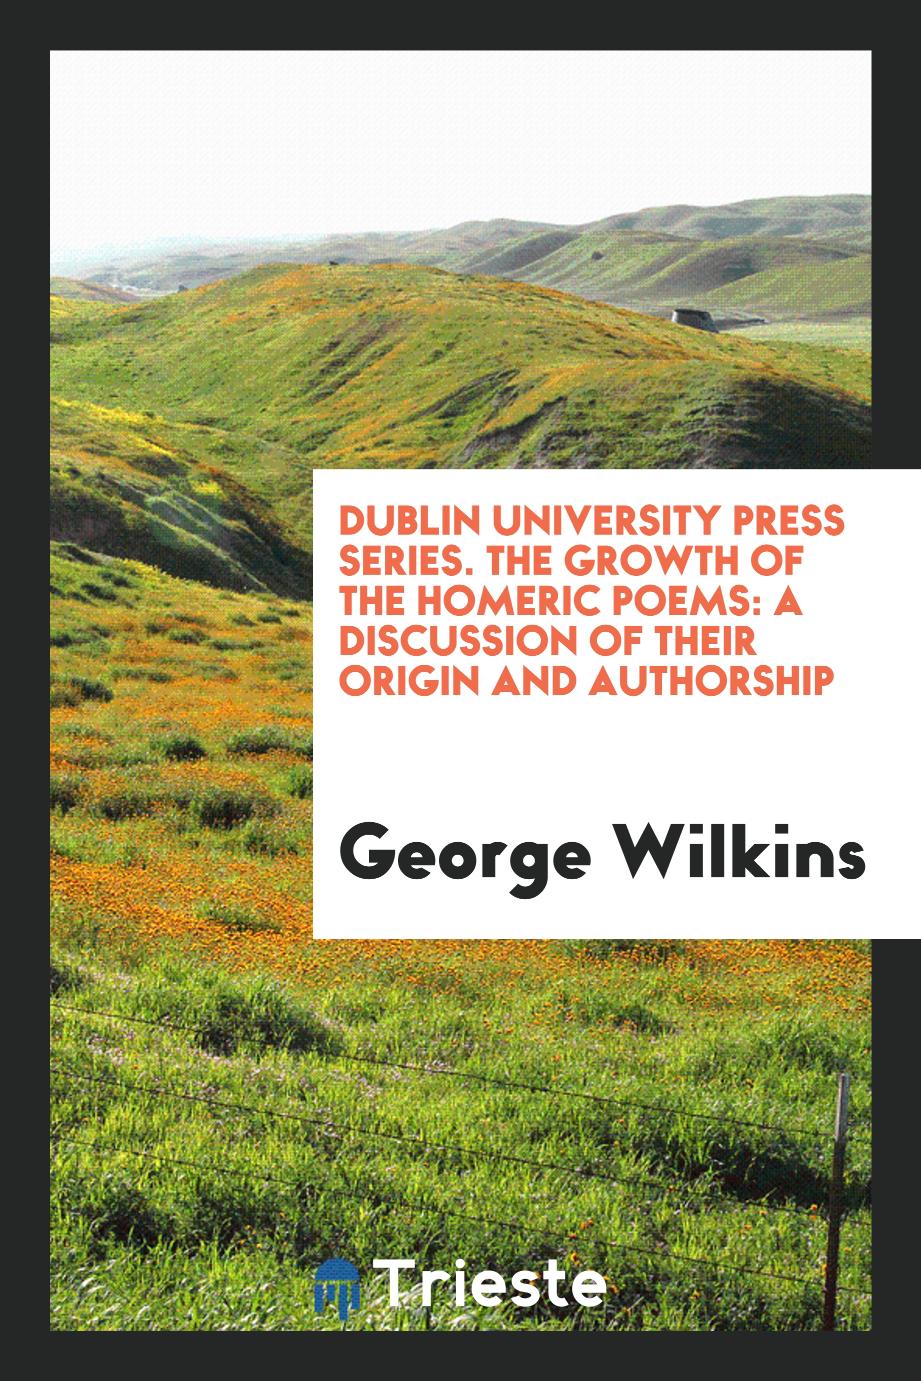 Dublin University Press Series. The Growth of the Homeric Poems: A Discussion of Their Origin and Authorship